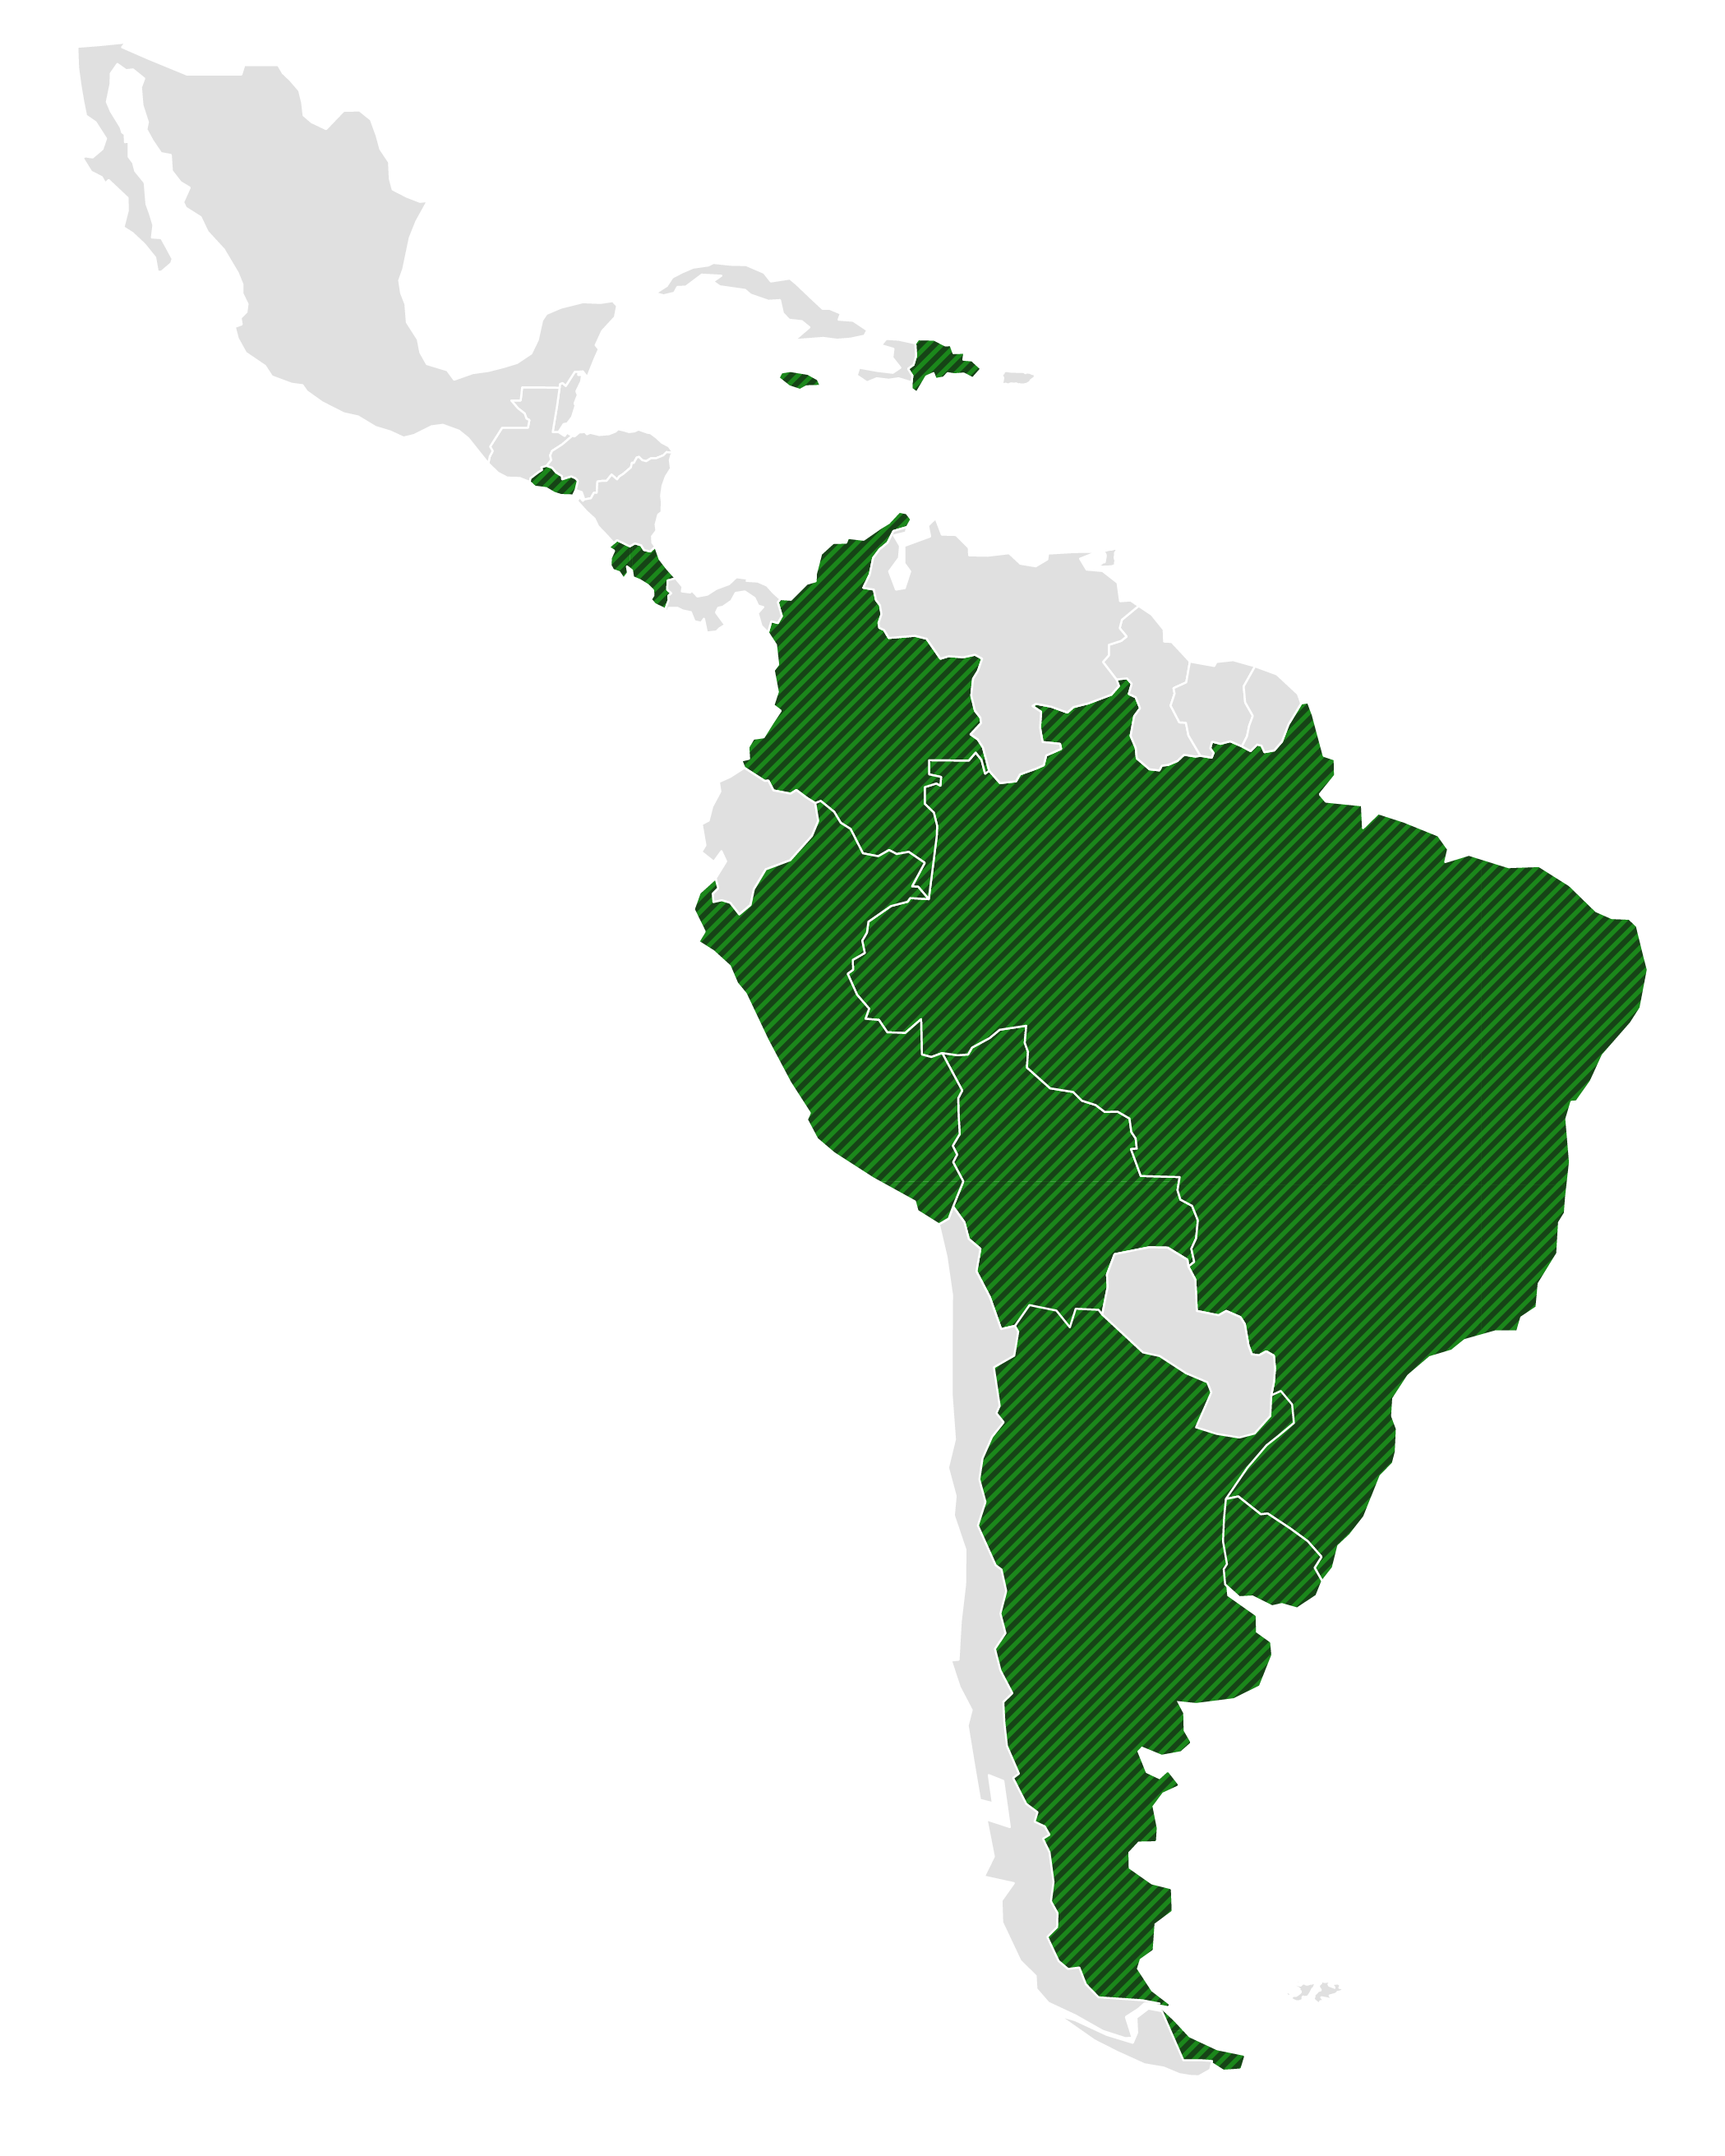 Countries covered in the Environmental Governance in Latin America study